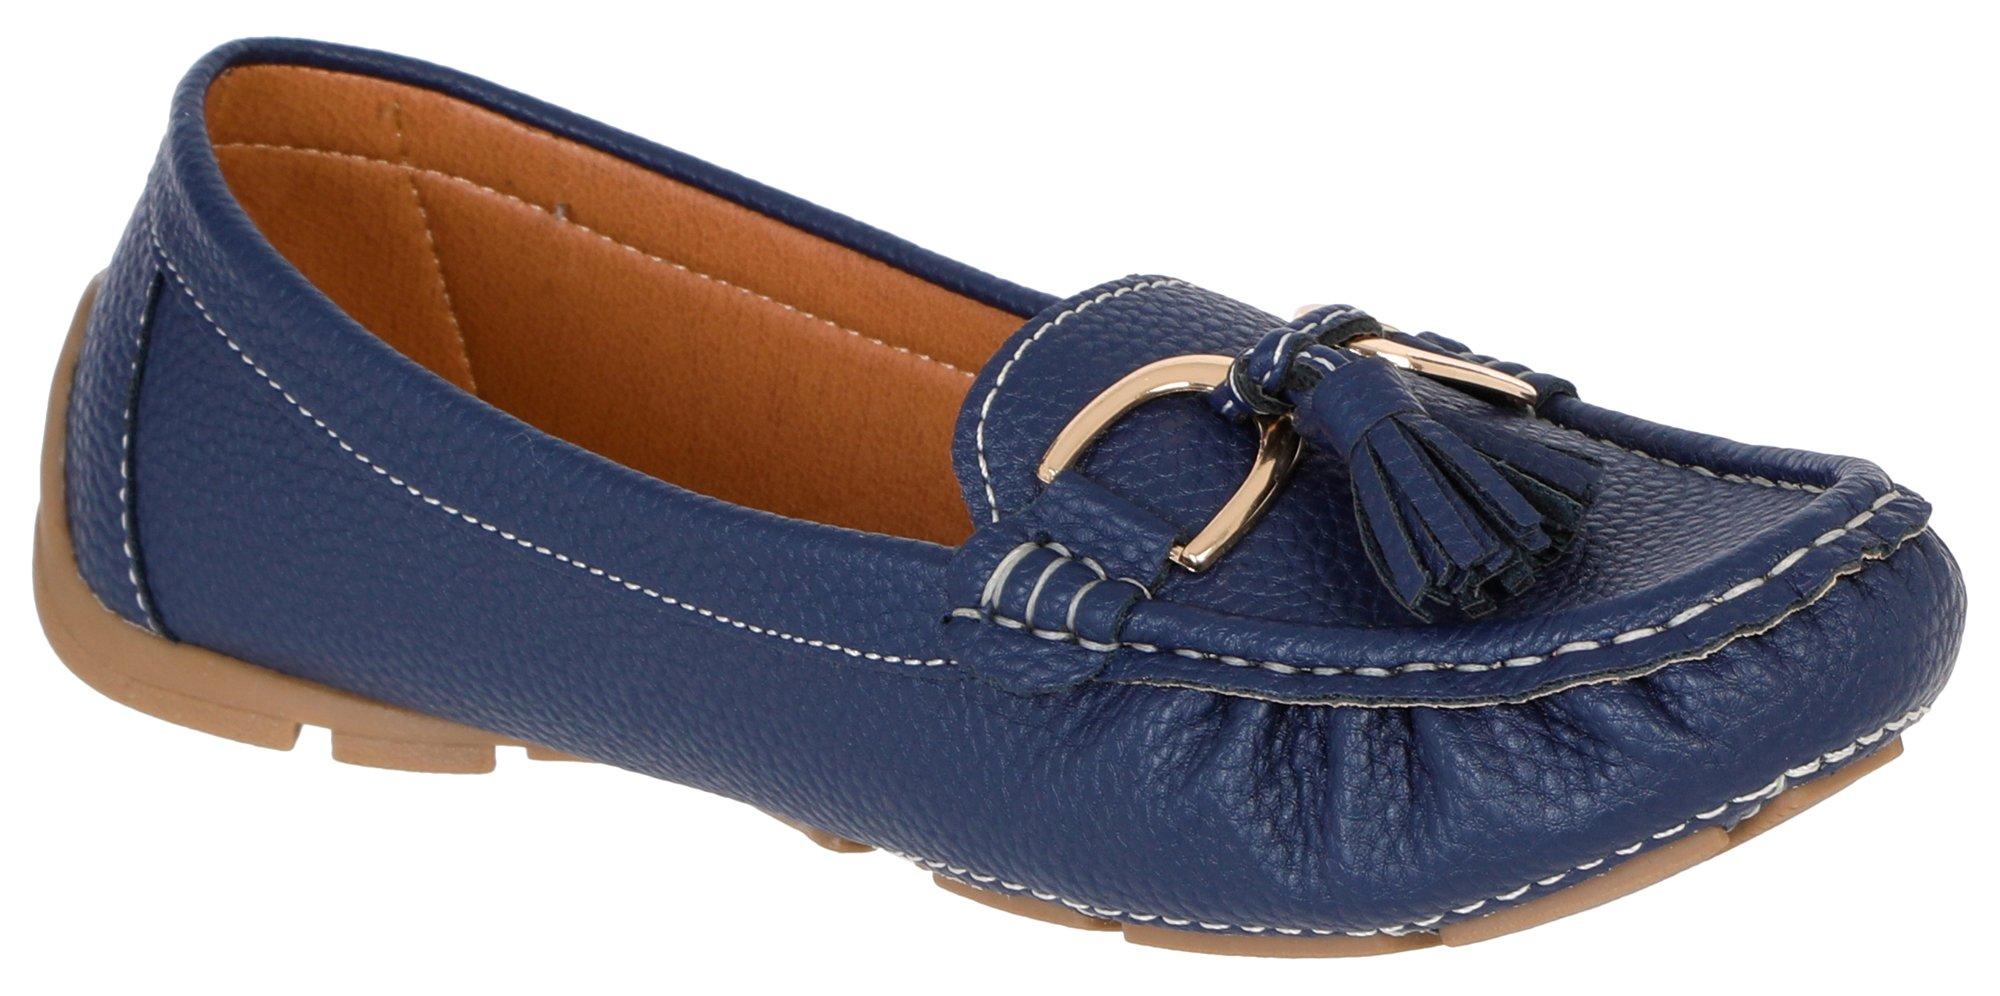 Women's Pebbled Faux Leather Loafers